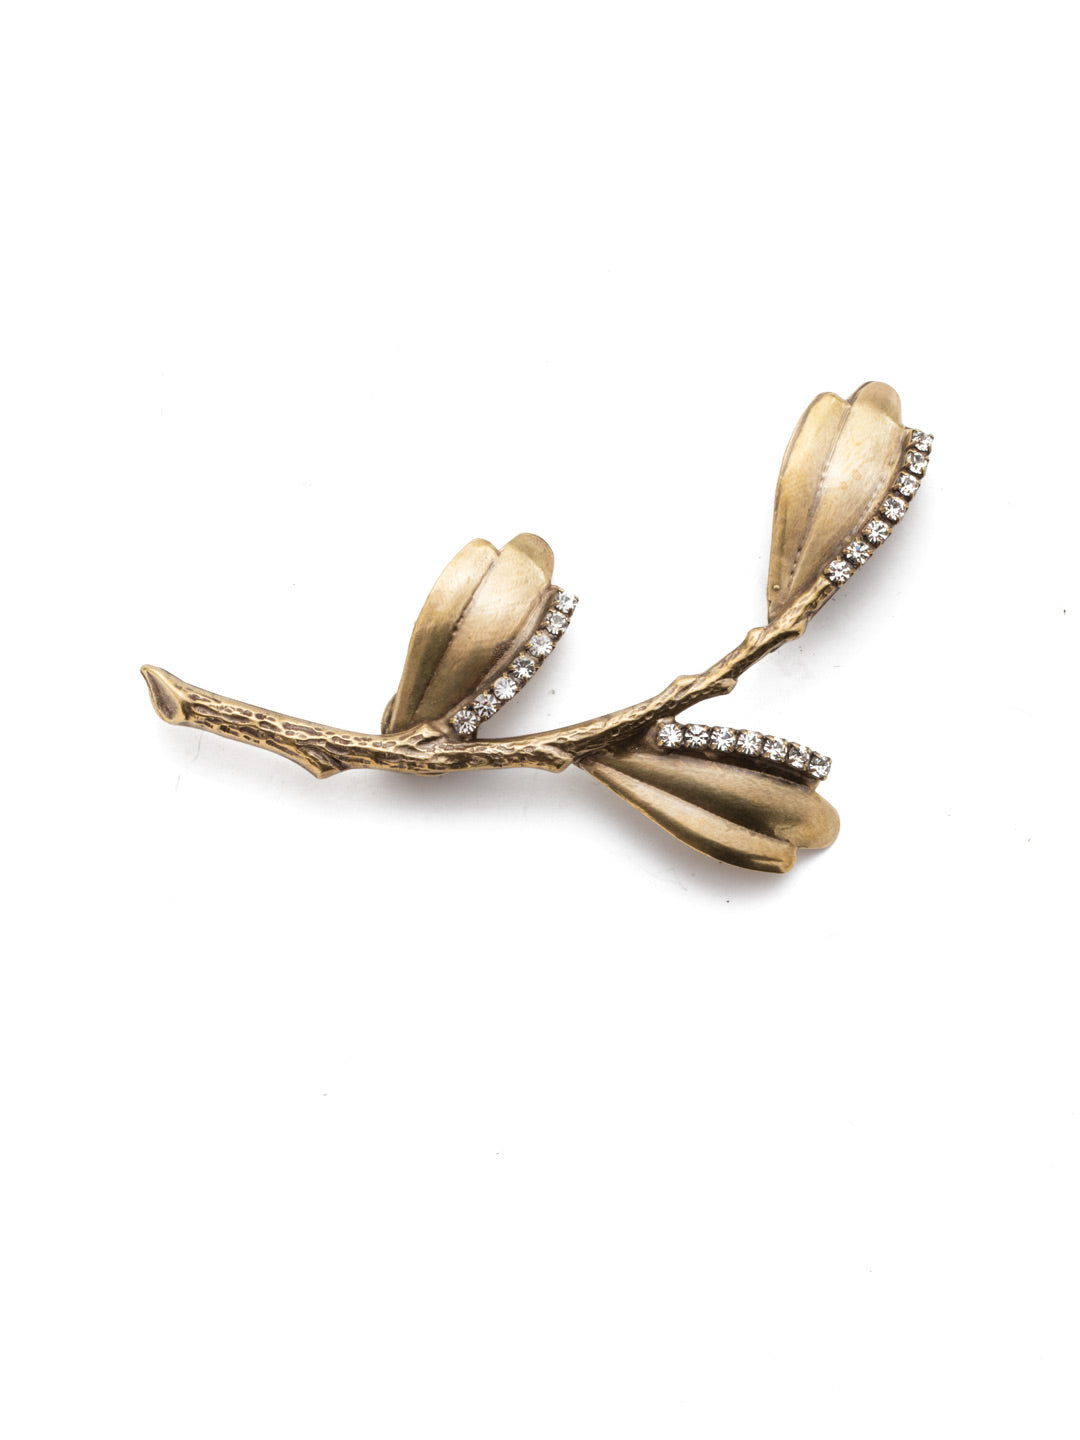 Autumn Magnetic Charm - CHM14AGCRY - <p>Our beautiful Autumn Magnetic Charm is hand-crafted with elegant crystals and is in the shape of a leaf. Dual magnet attachment for easy removal. This charm will make sparkle to your clothes, refrigerator and other accessories. From Sorrelli's Crystal collection in our Antique Gold-tone finish.</p>